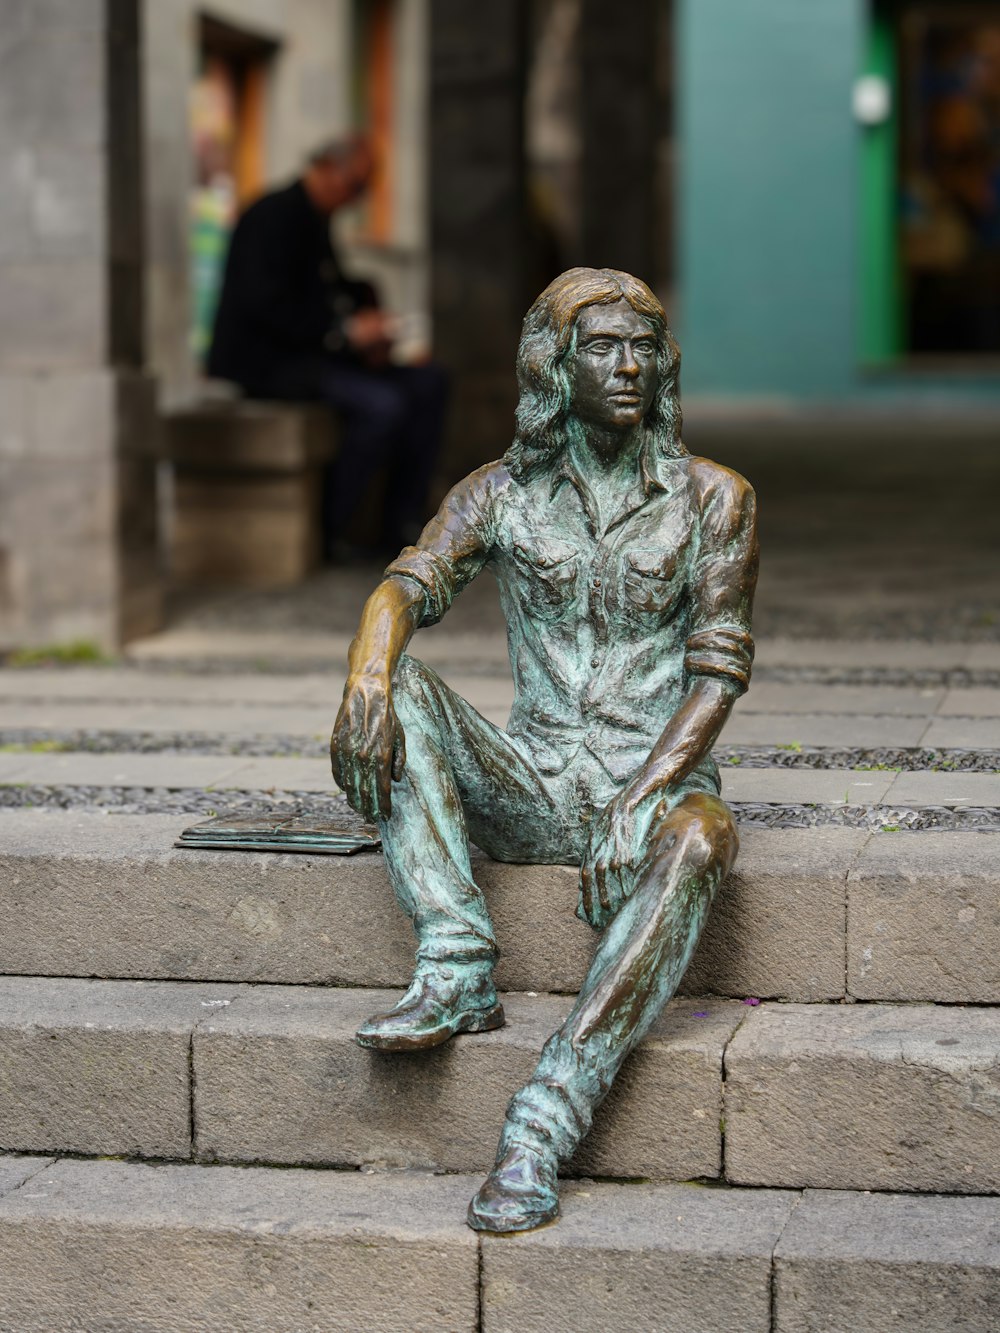 a statue of a man sitting on some steps